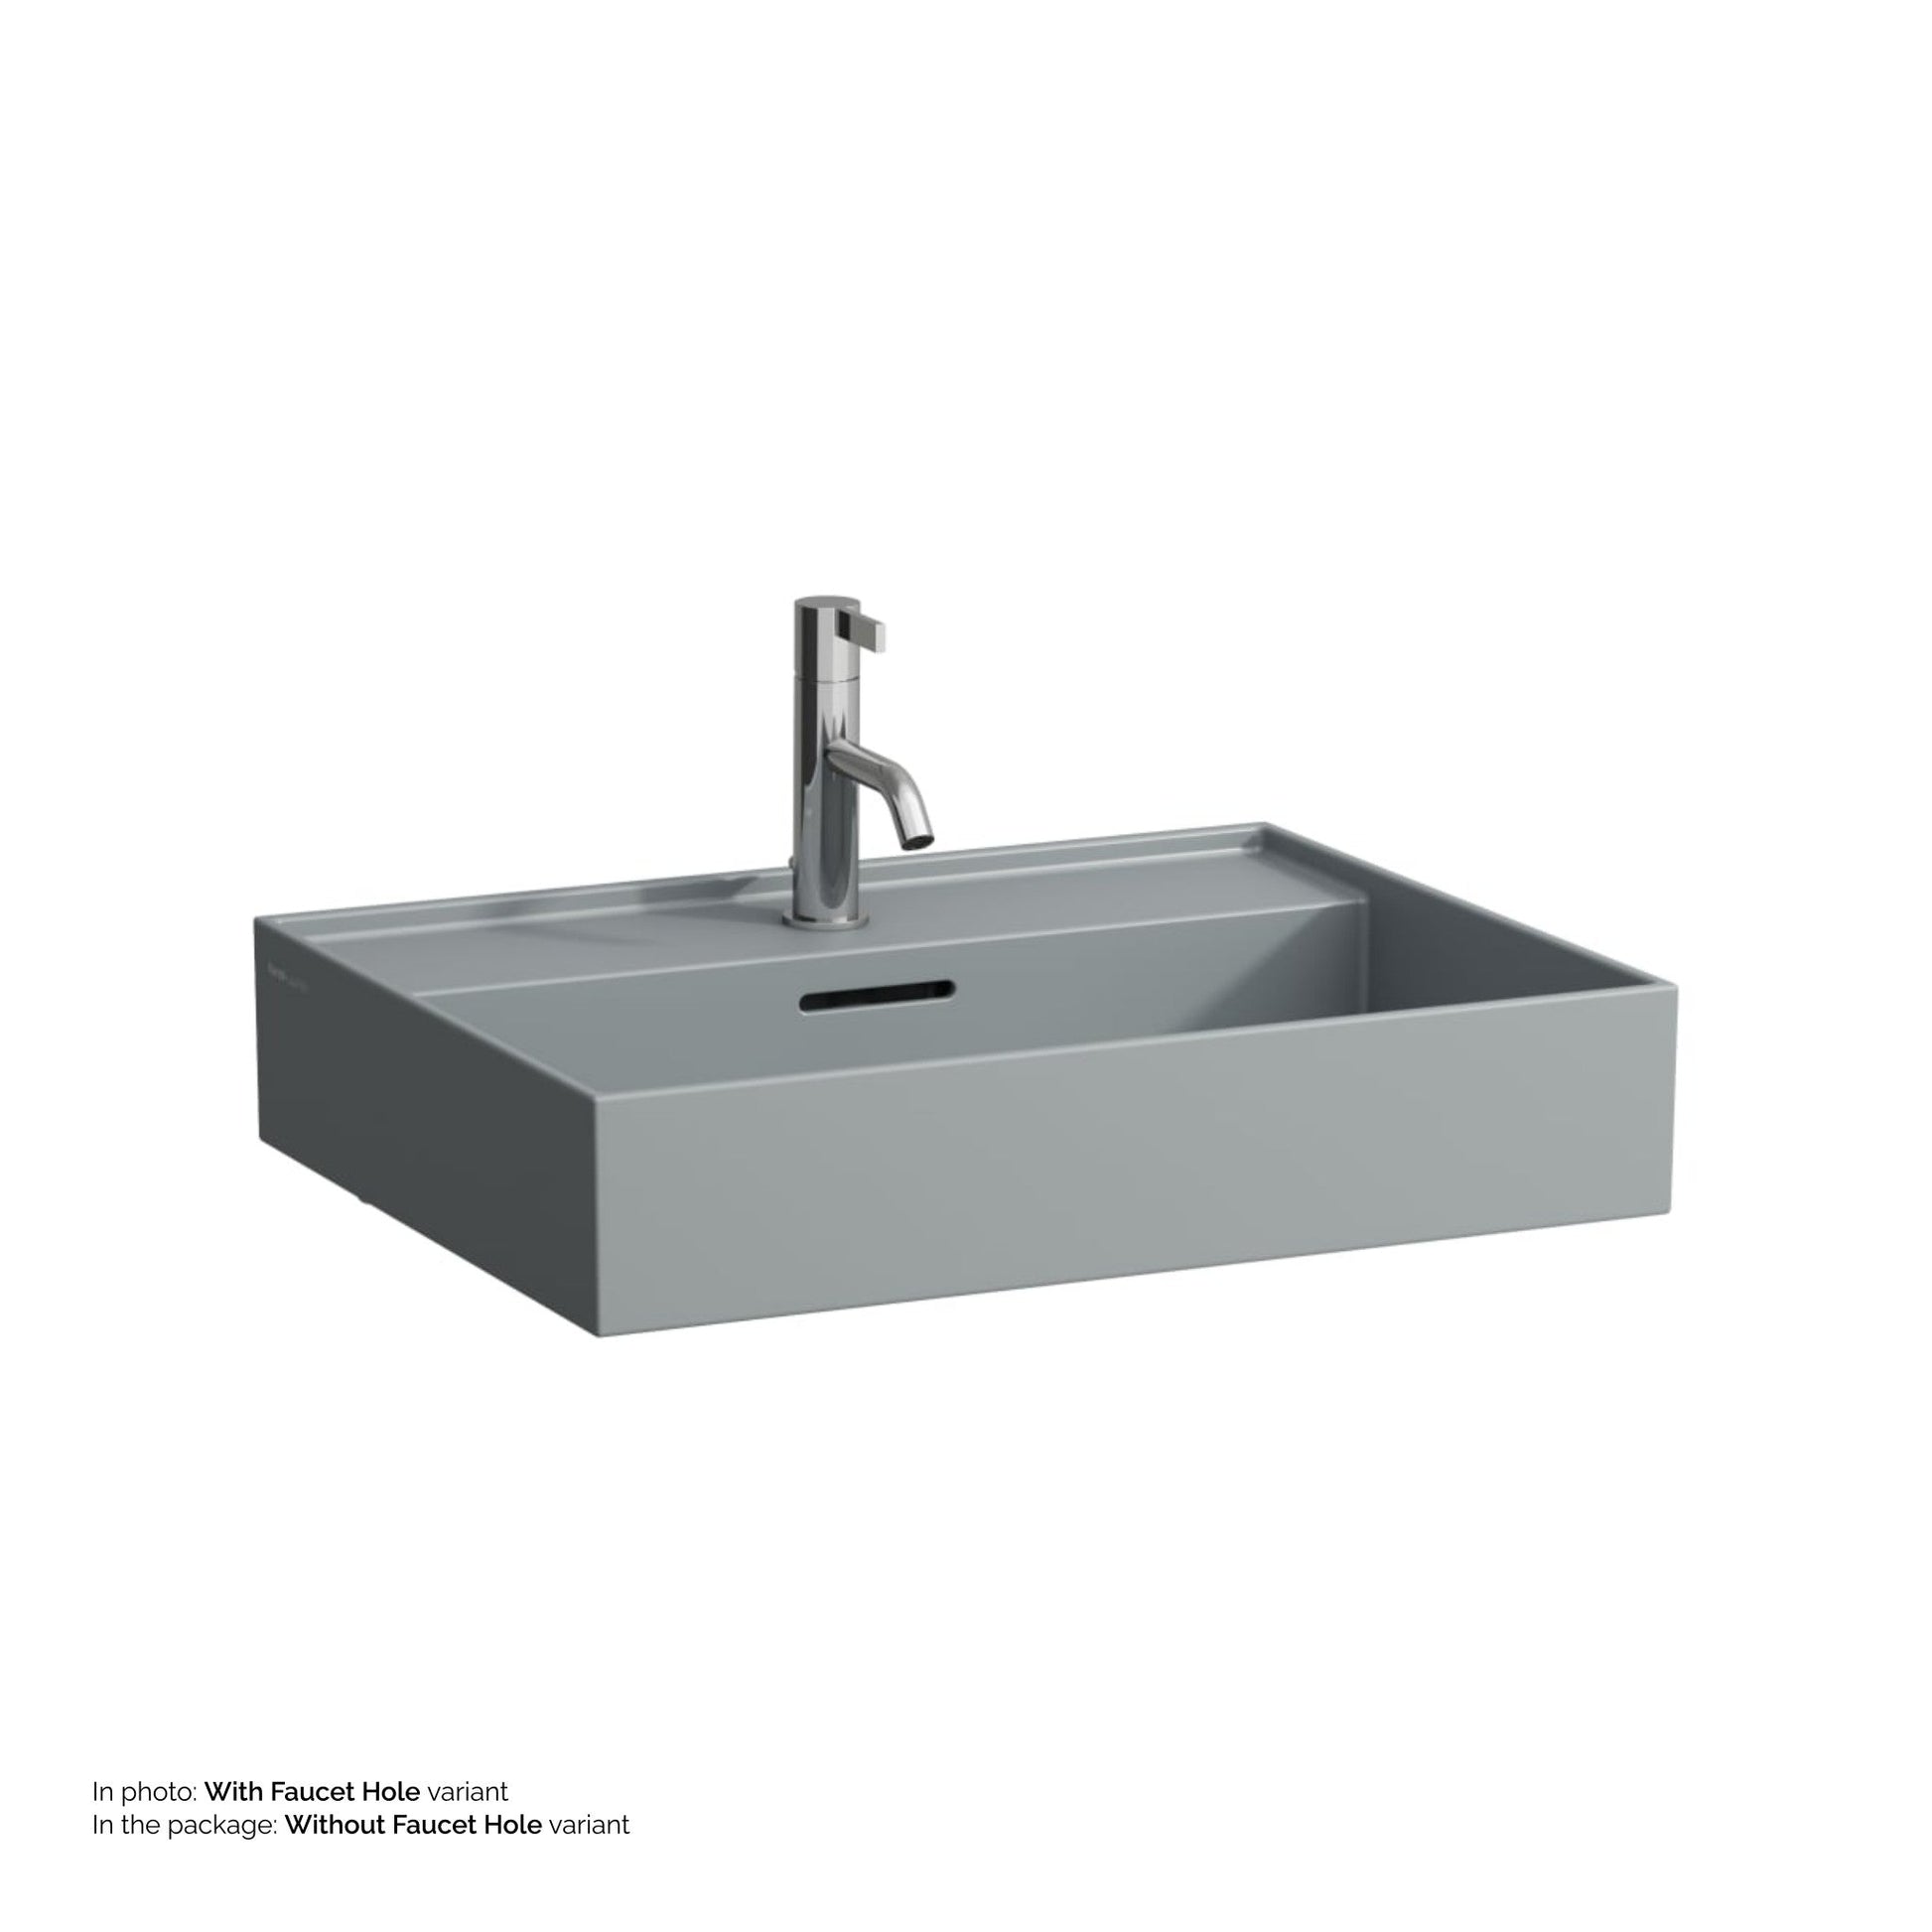 Laufen Kartell 24" x 18" Matte Graphite Countertop Bathroom Sink Without Faucet Hole